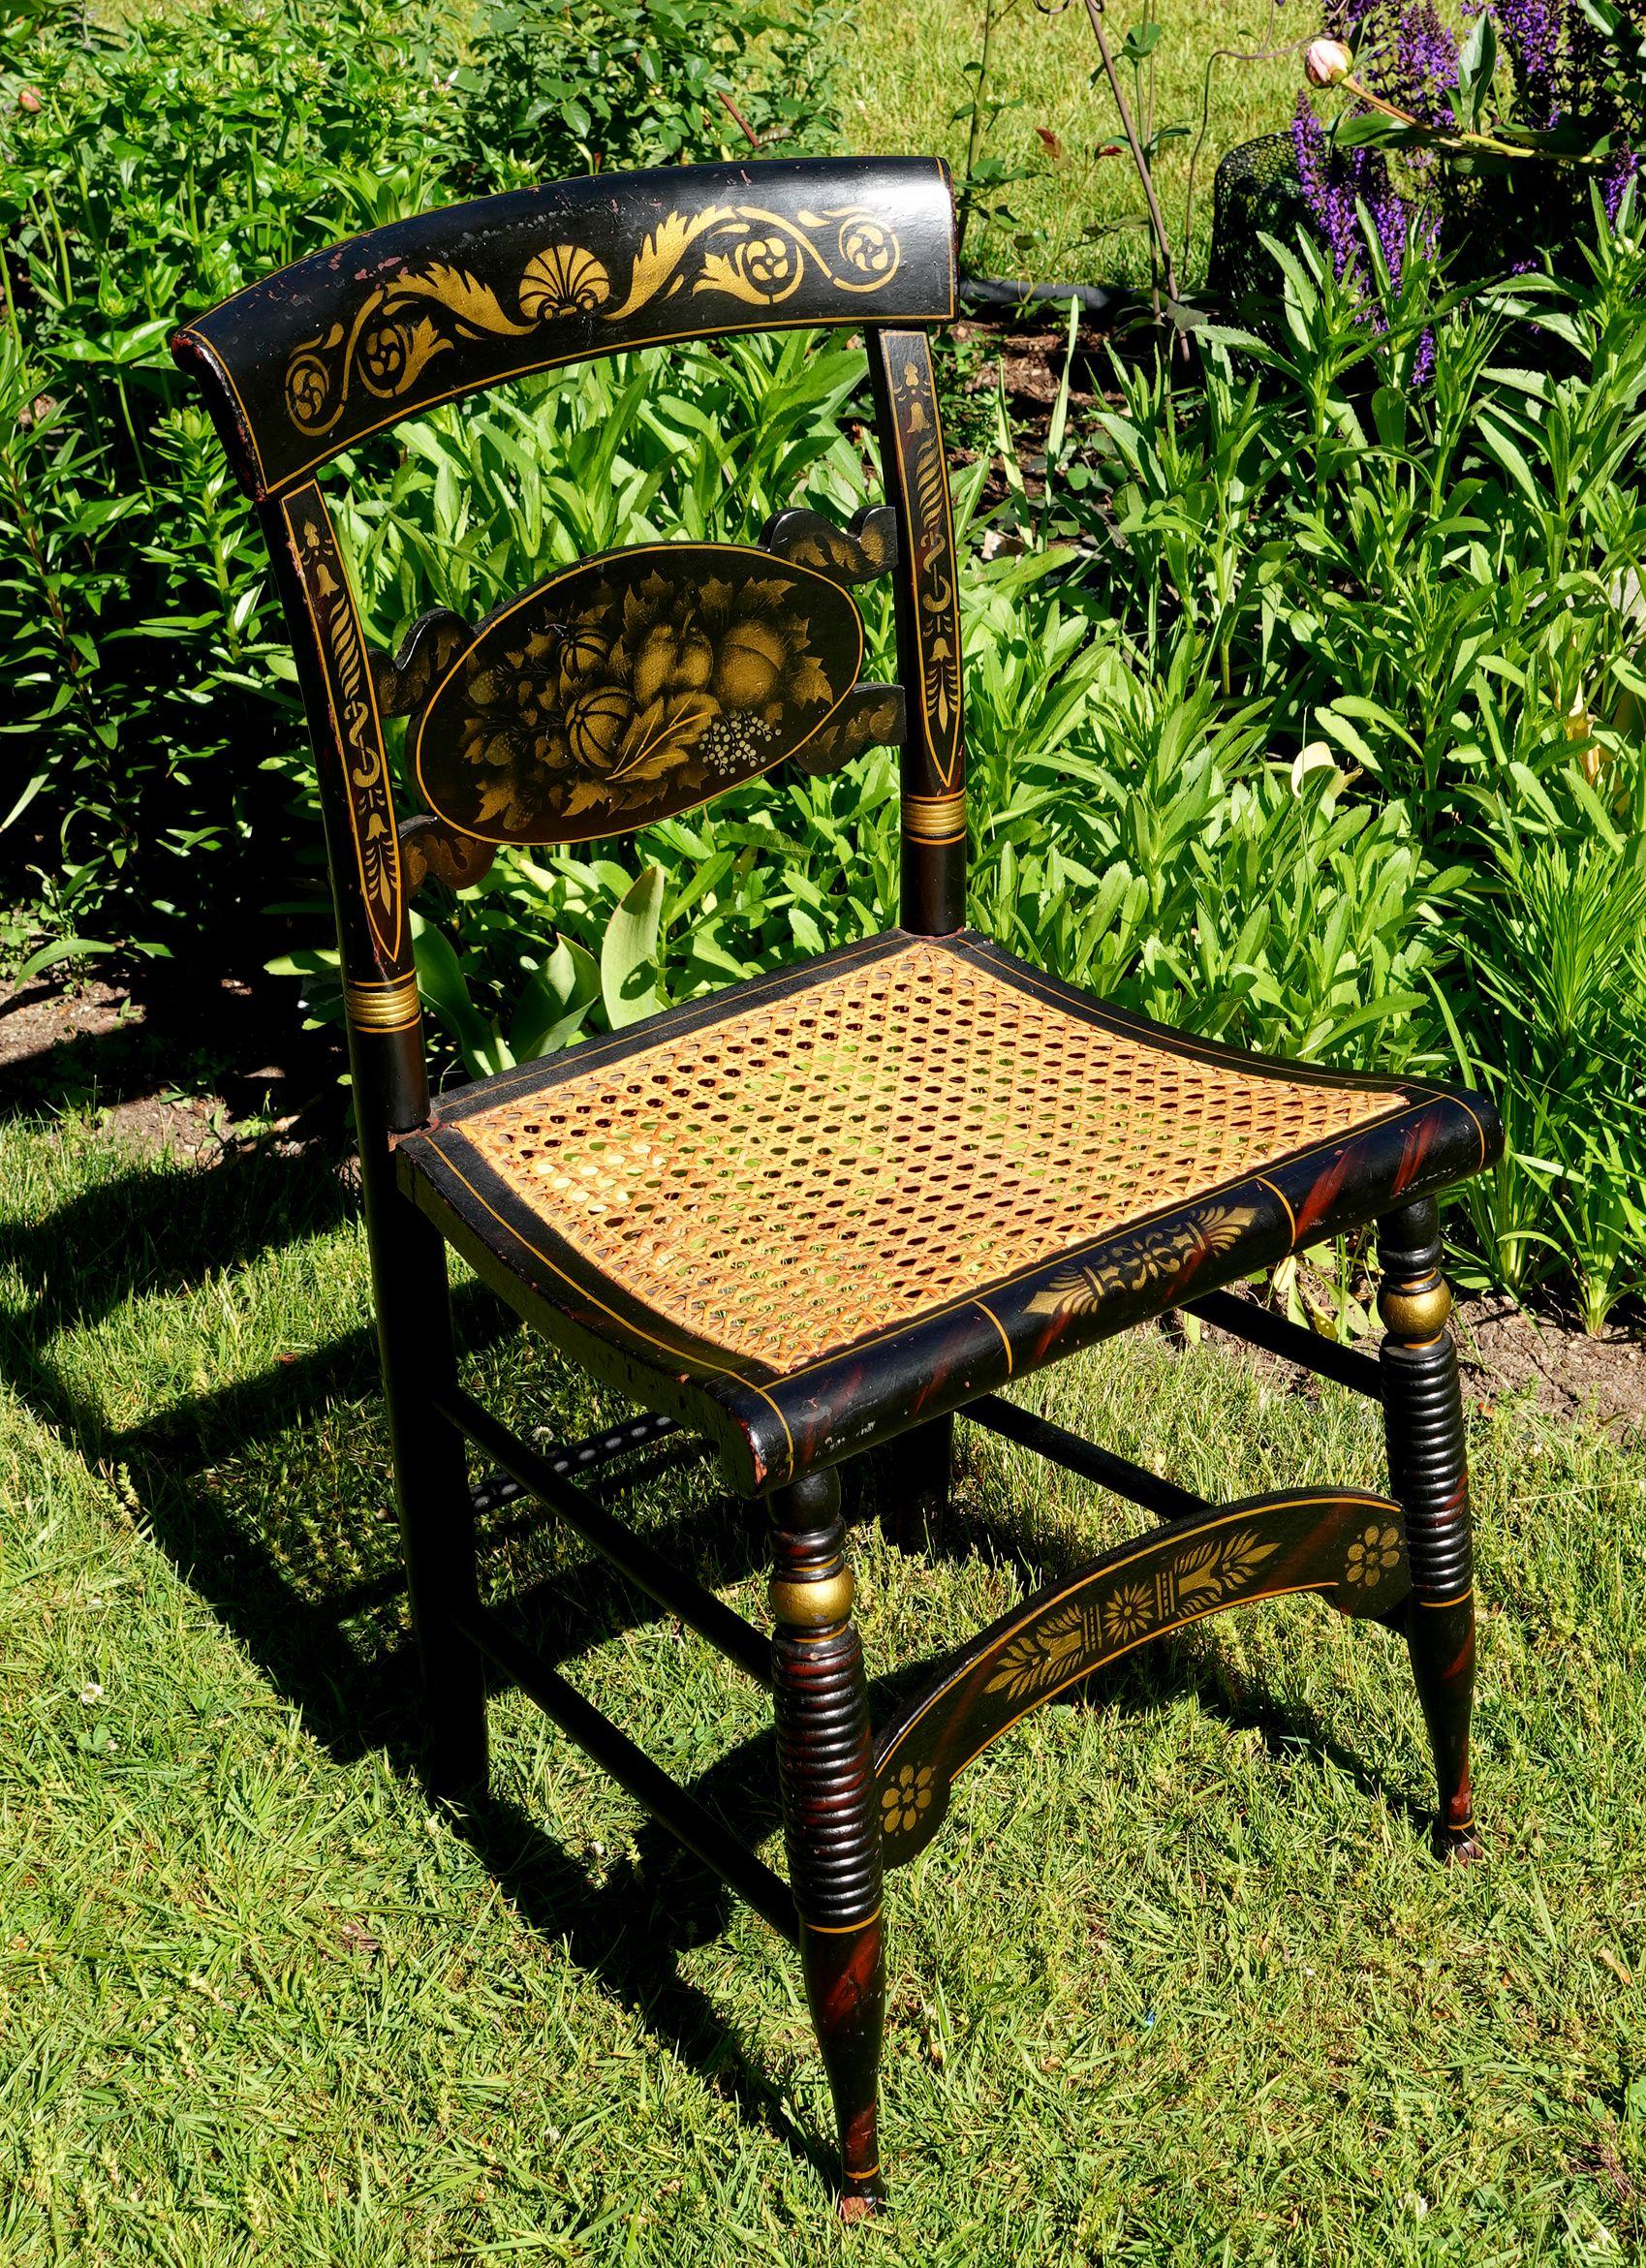 A New England Hitchcock Style/Fancy chair. Hand painted/stenciled with a deep and rich patination from years of good wear. The seat is woven rush seats and is in very good condition.

Width: 17 in (43.18 cm)
Depth: 15.25 in (38.74 cm)
Height: